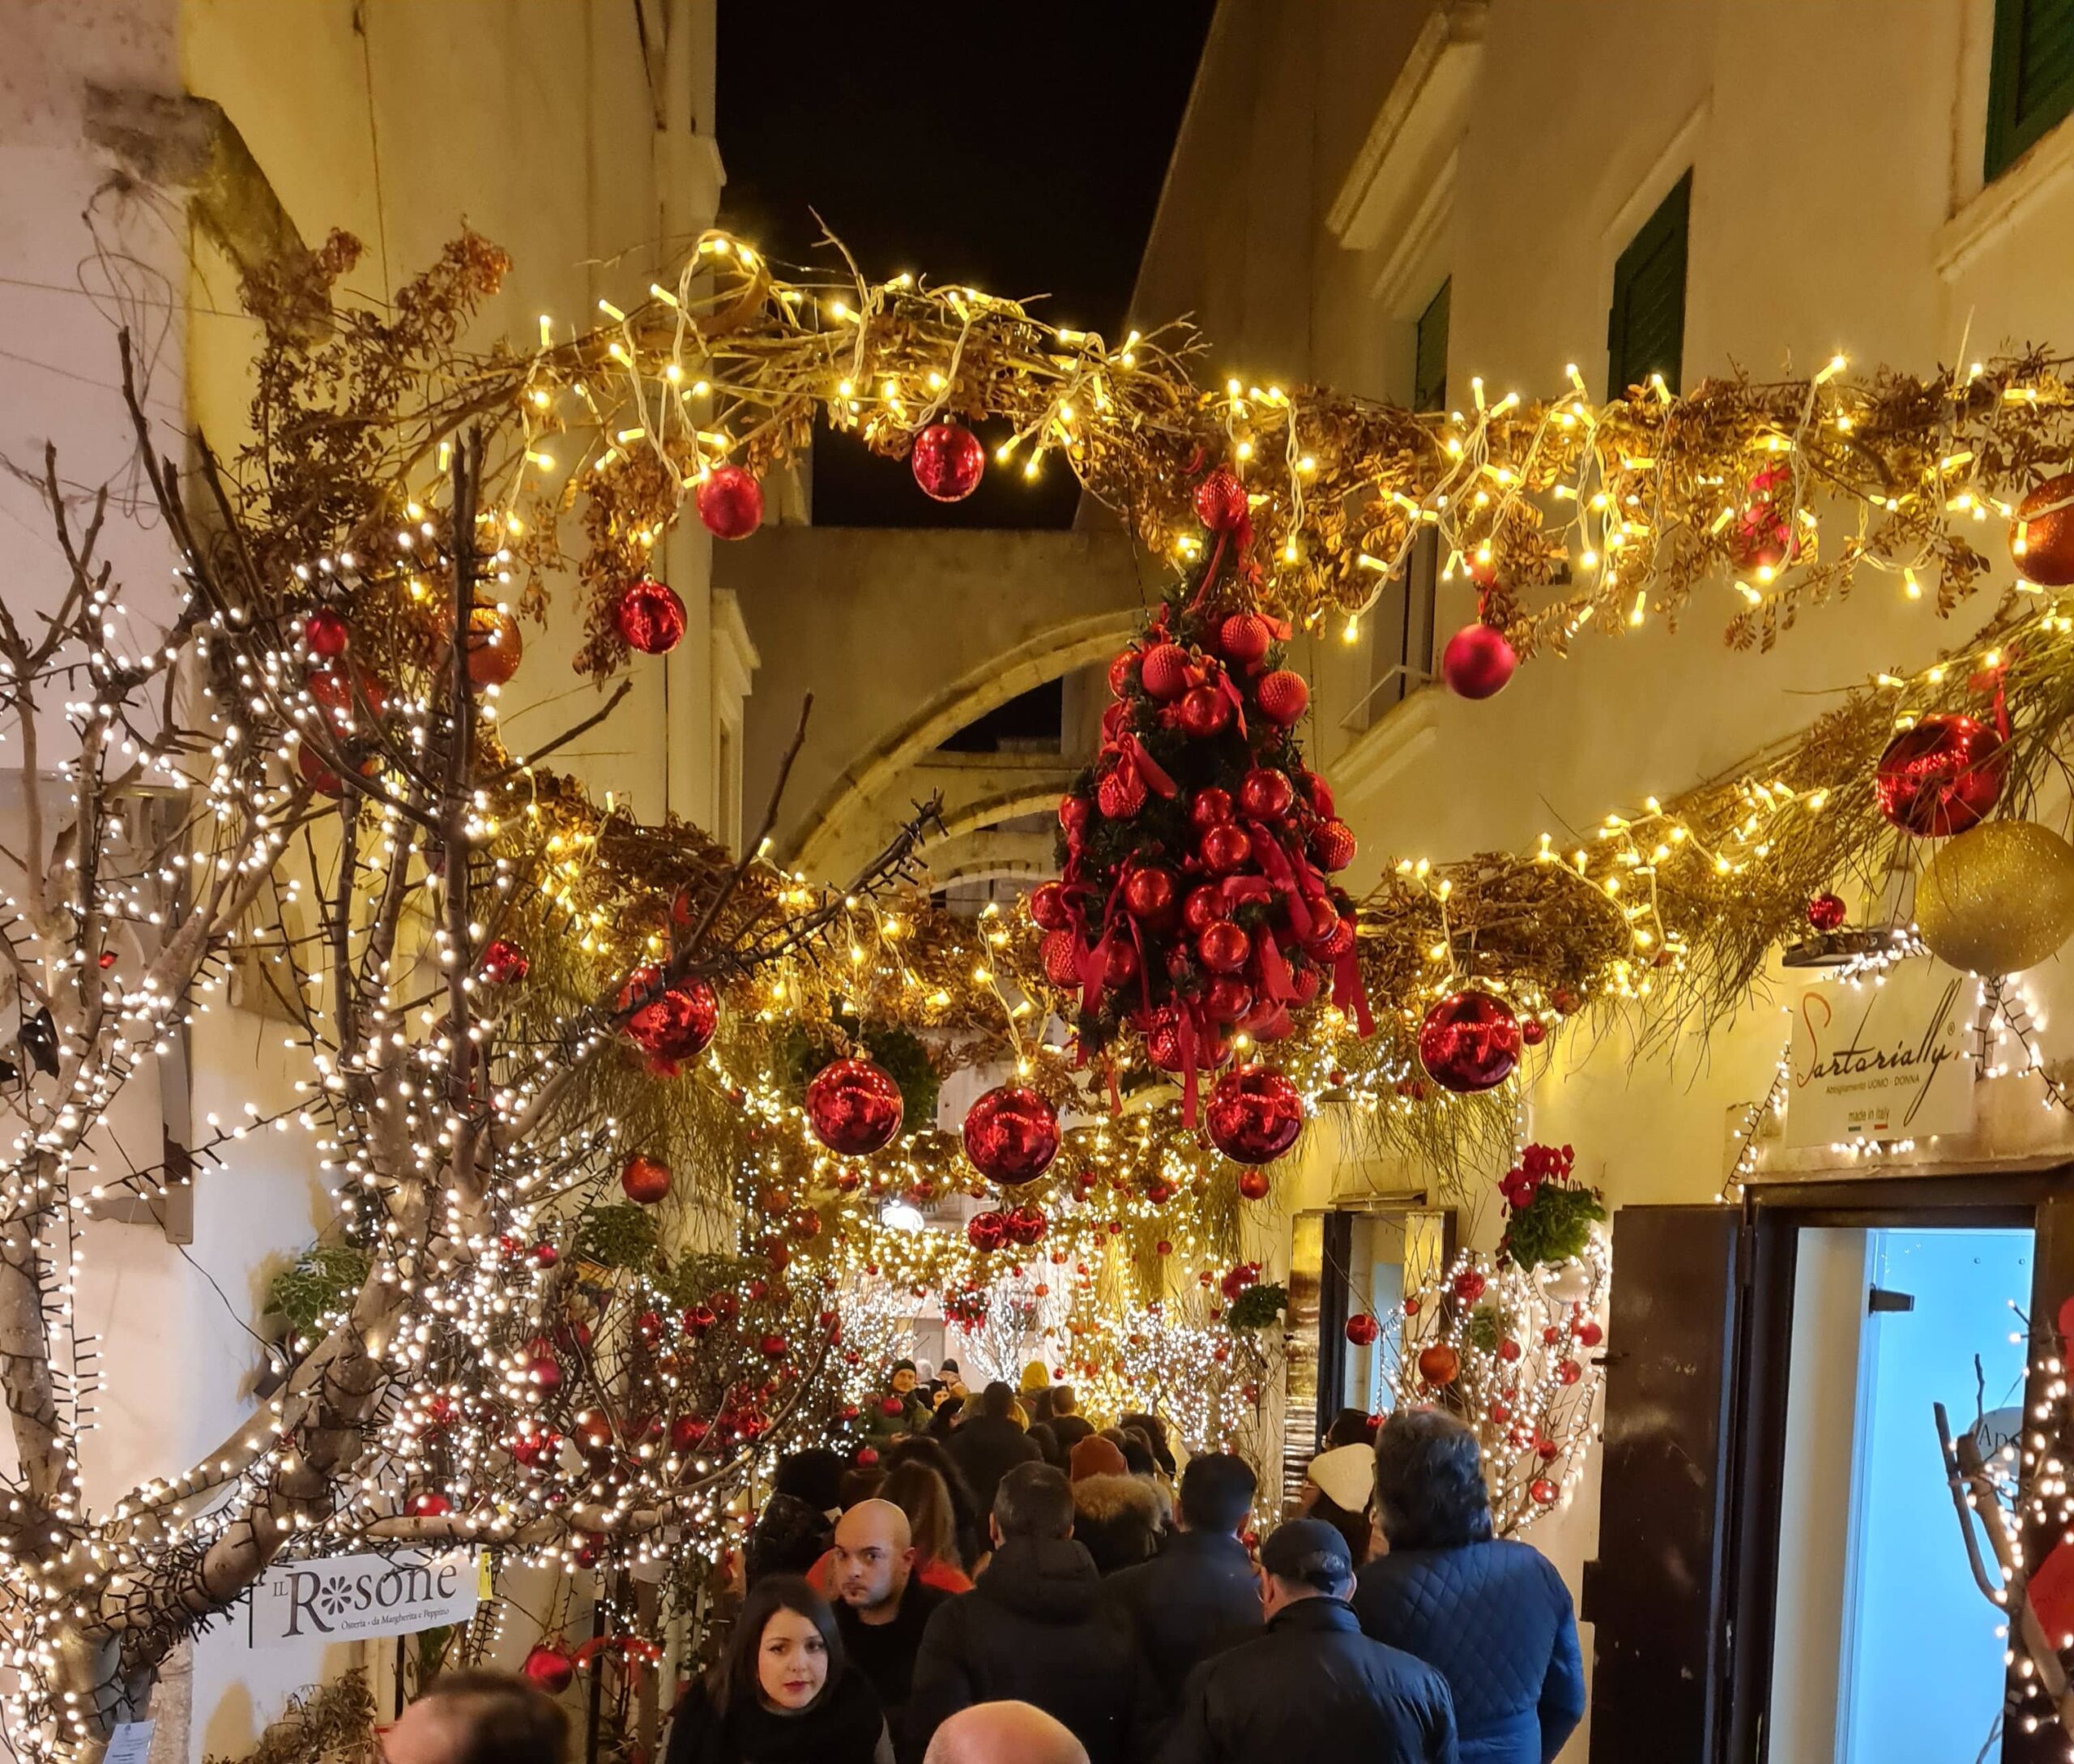 Locorotondo alleys at Christmas, beloved by children